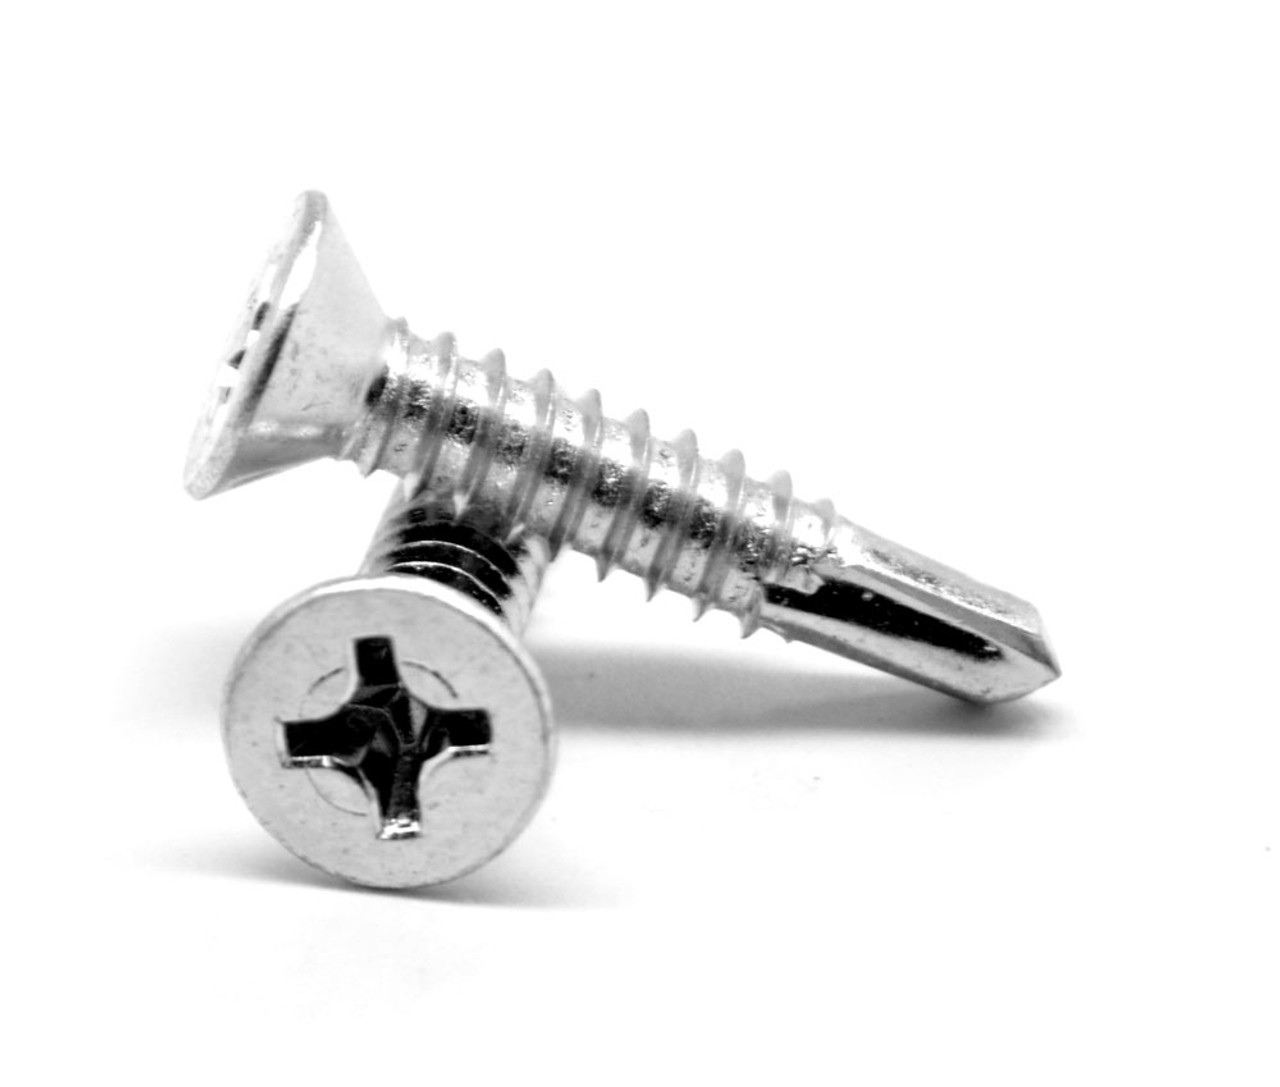 1/4-14 x 1 1/4 Self Drilling Screw Phillips Flat Head #3 Point Stainless Steel 18-8